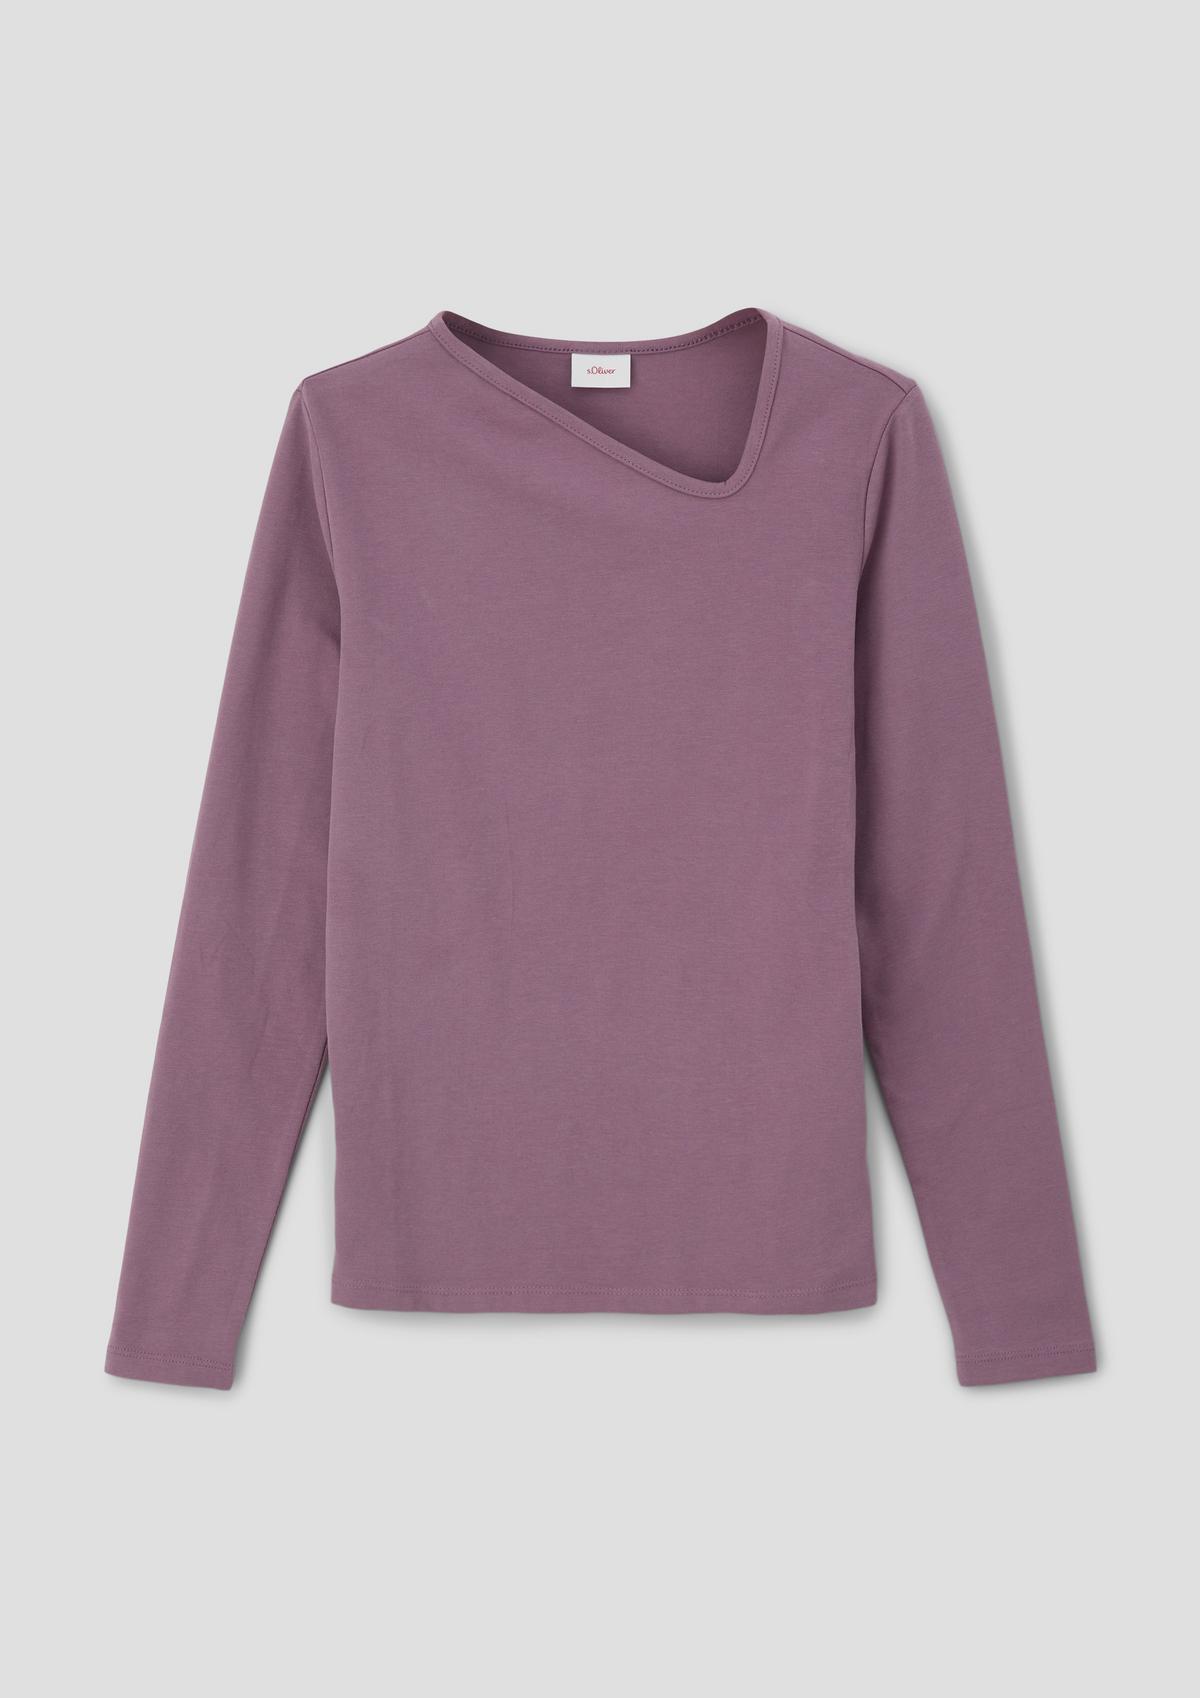 s.Oliver Long sleeve top with an asymmetric neckline